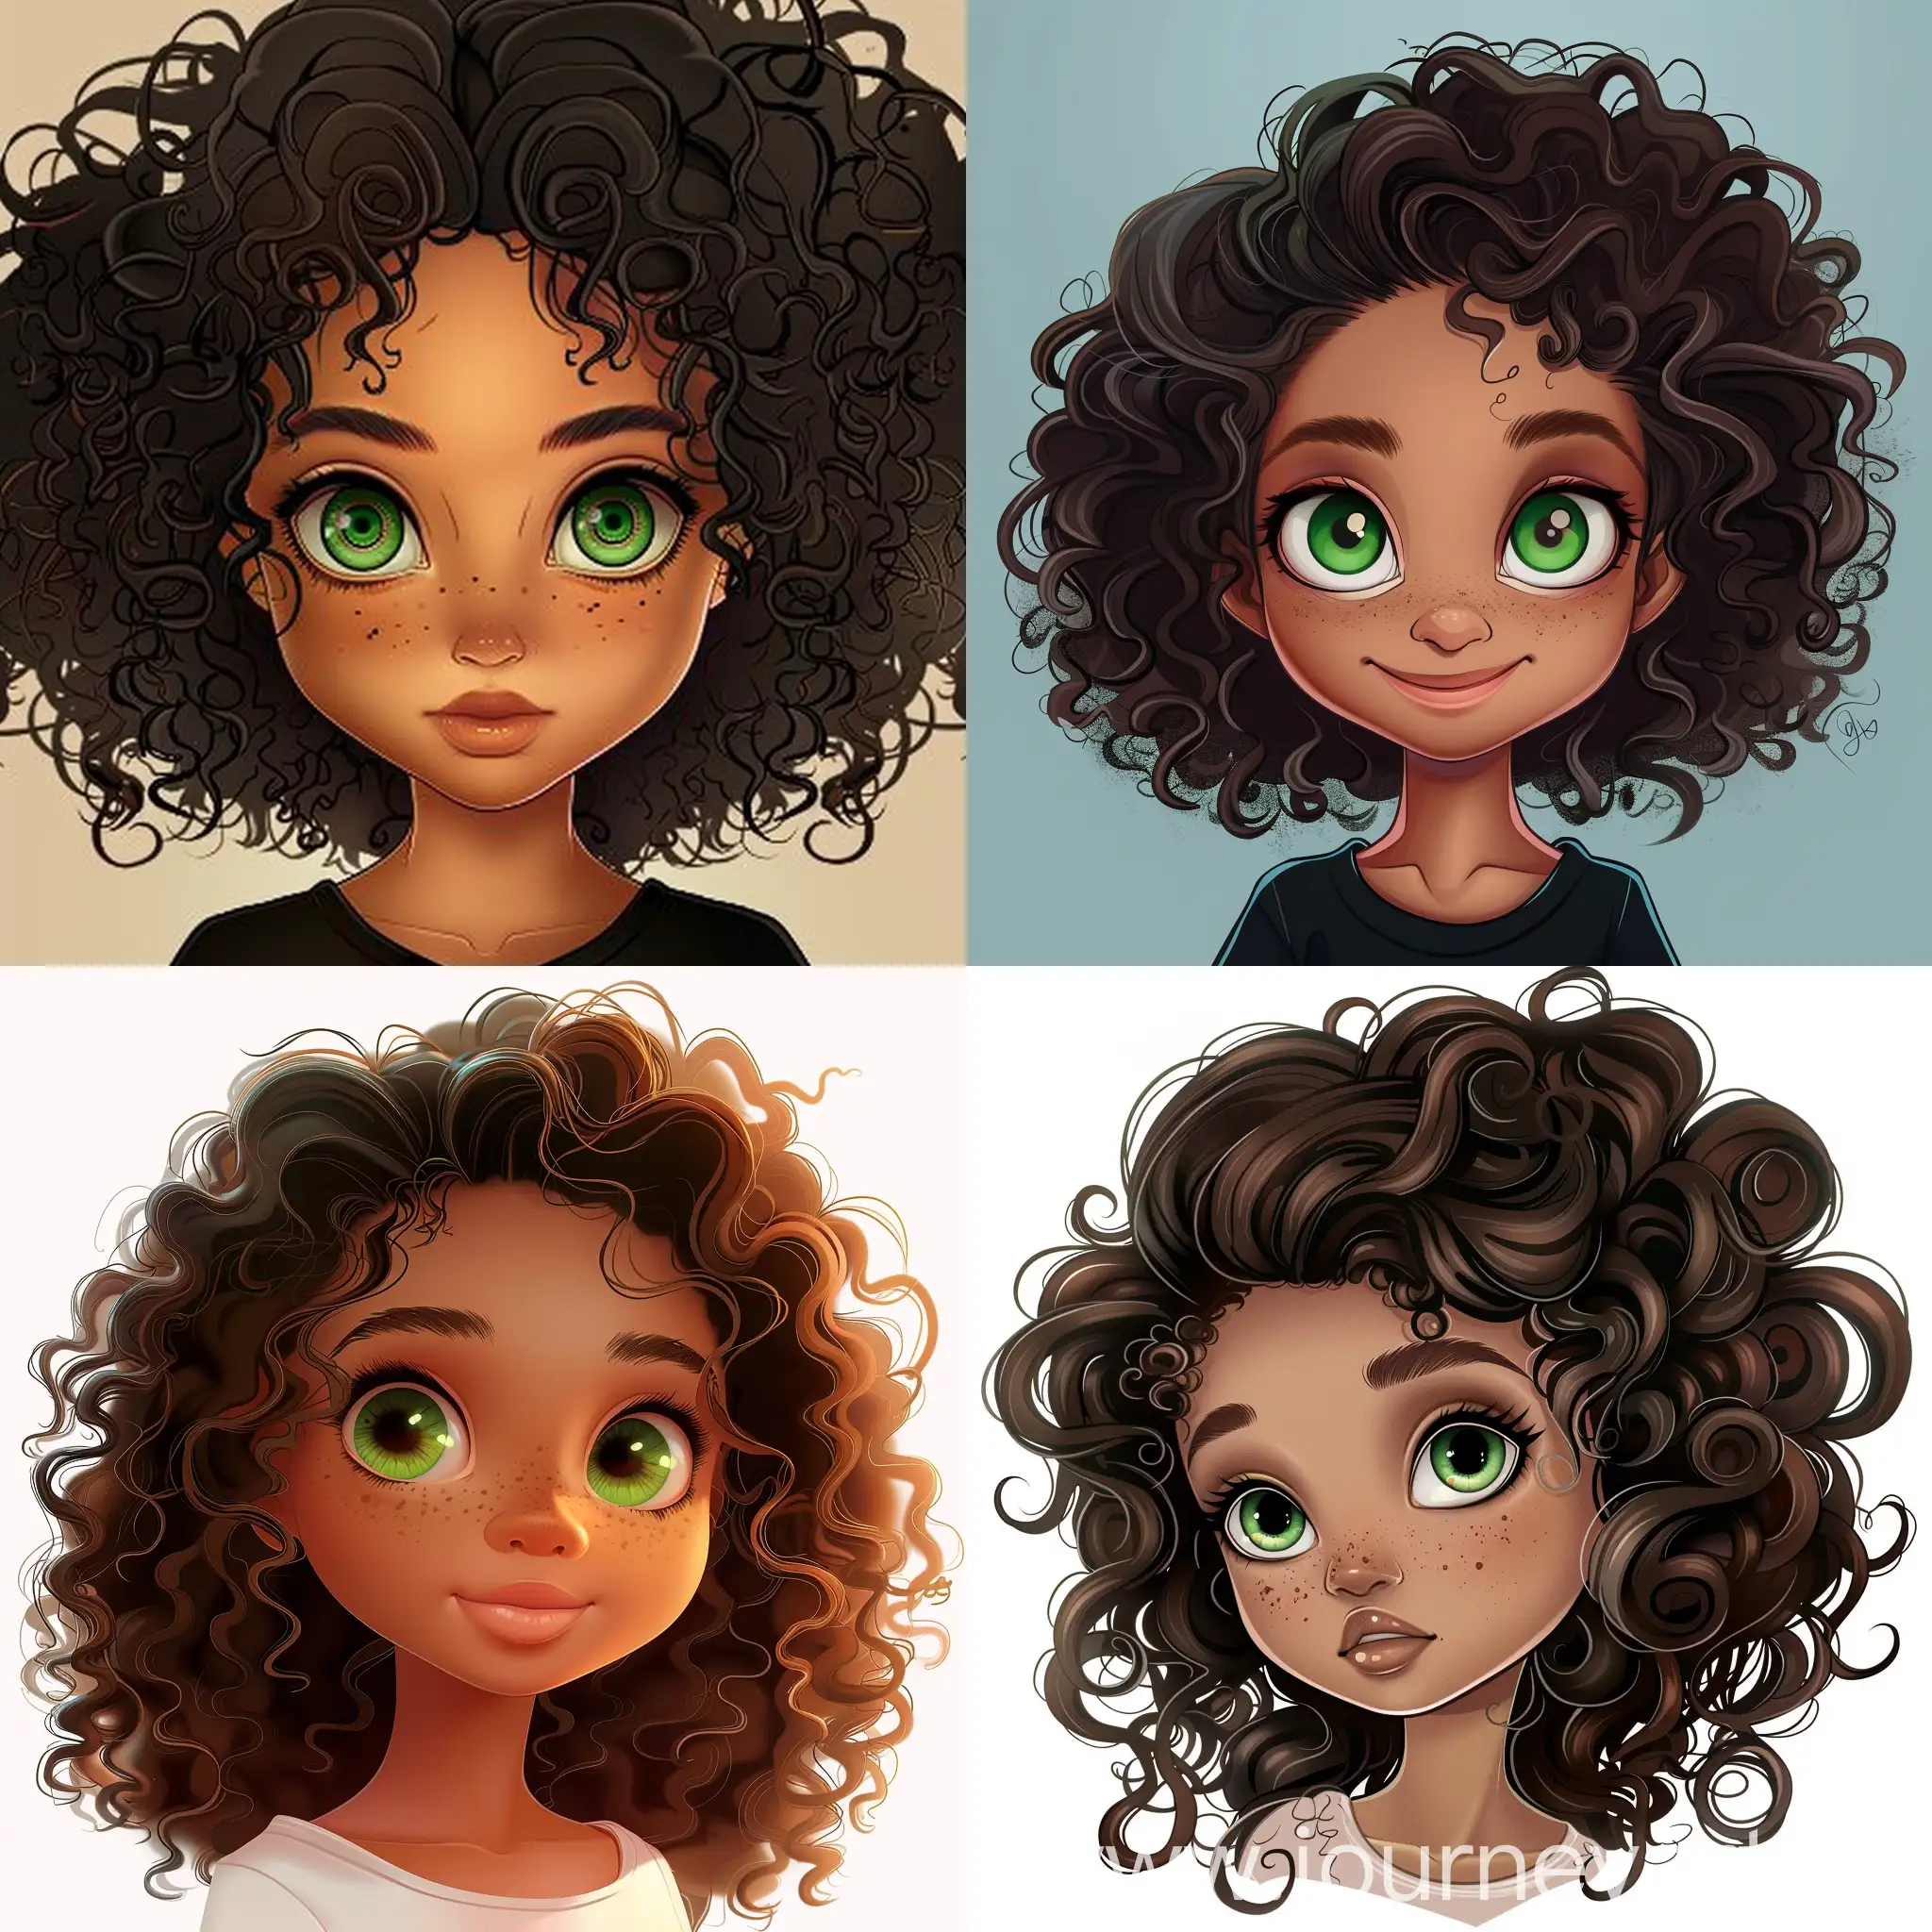 biracial cartoon girl with curly hair and green eyes